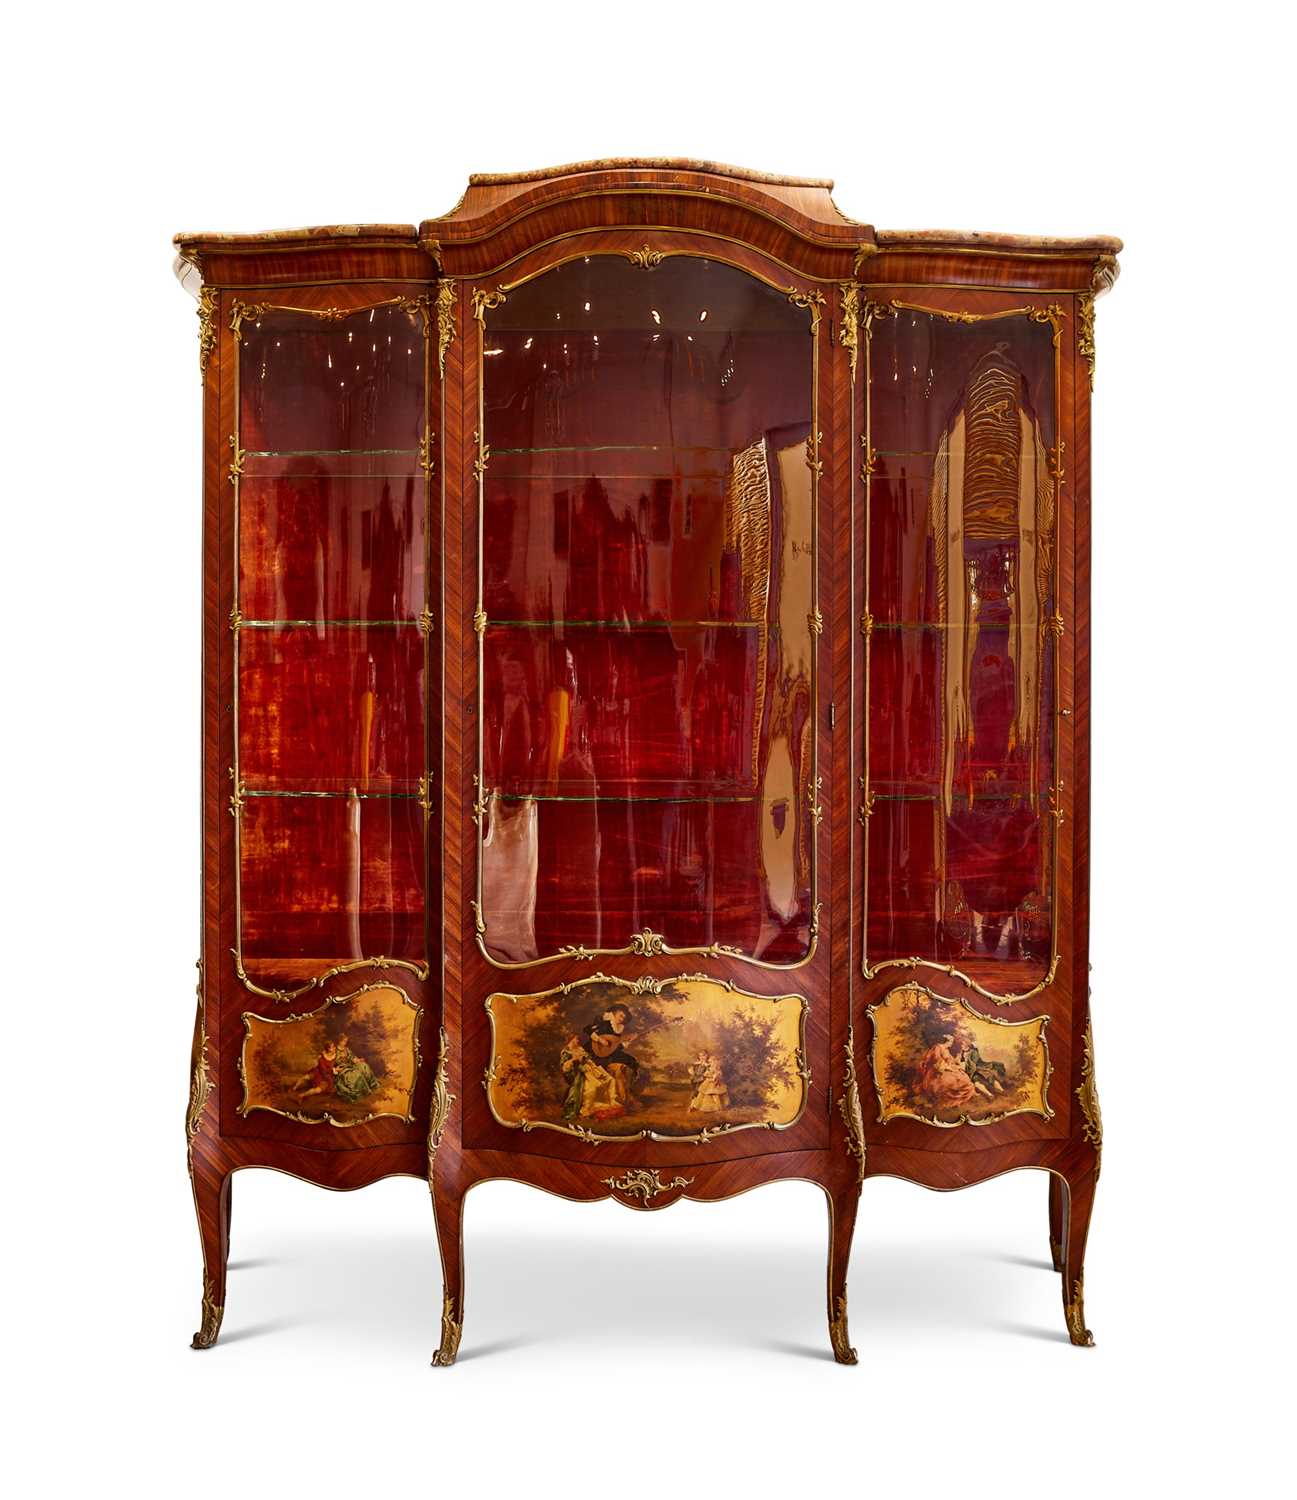 A FINE LATE 19TH CENTURY VITRINE IN THE MANNER OF FRANCOIS LINKE